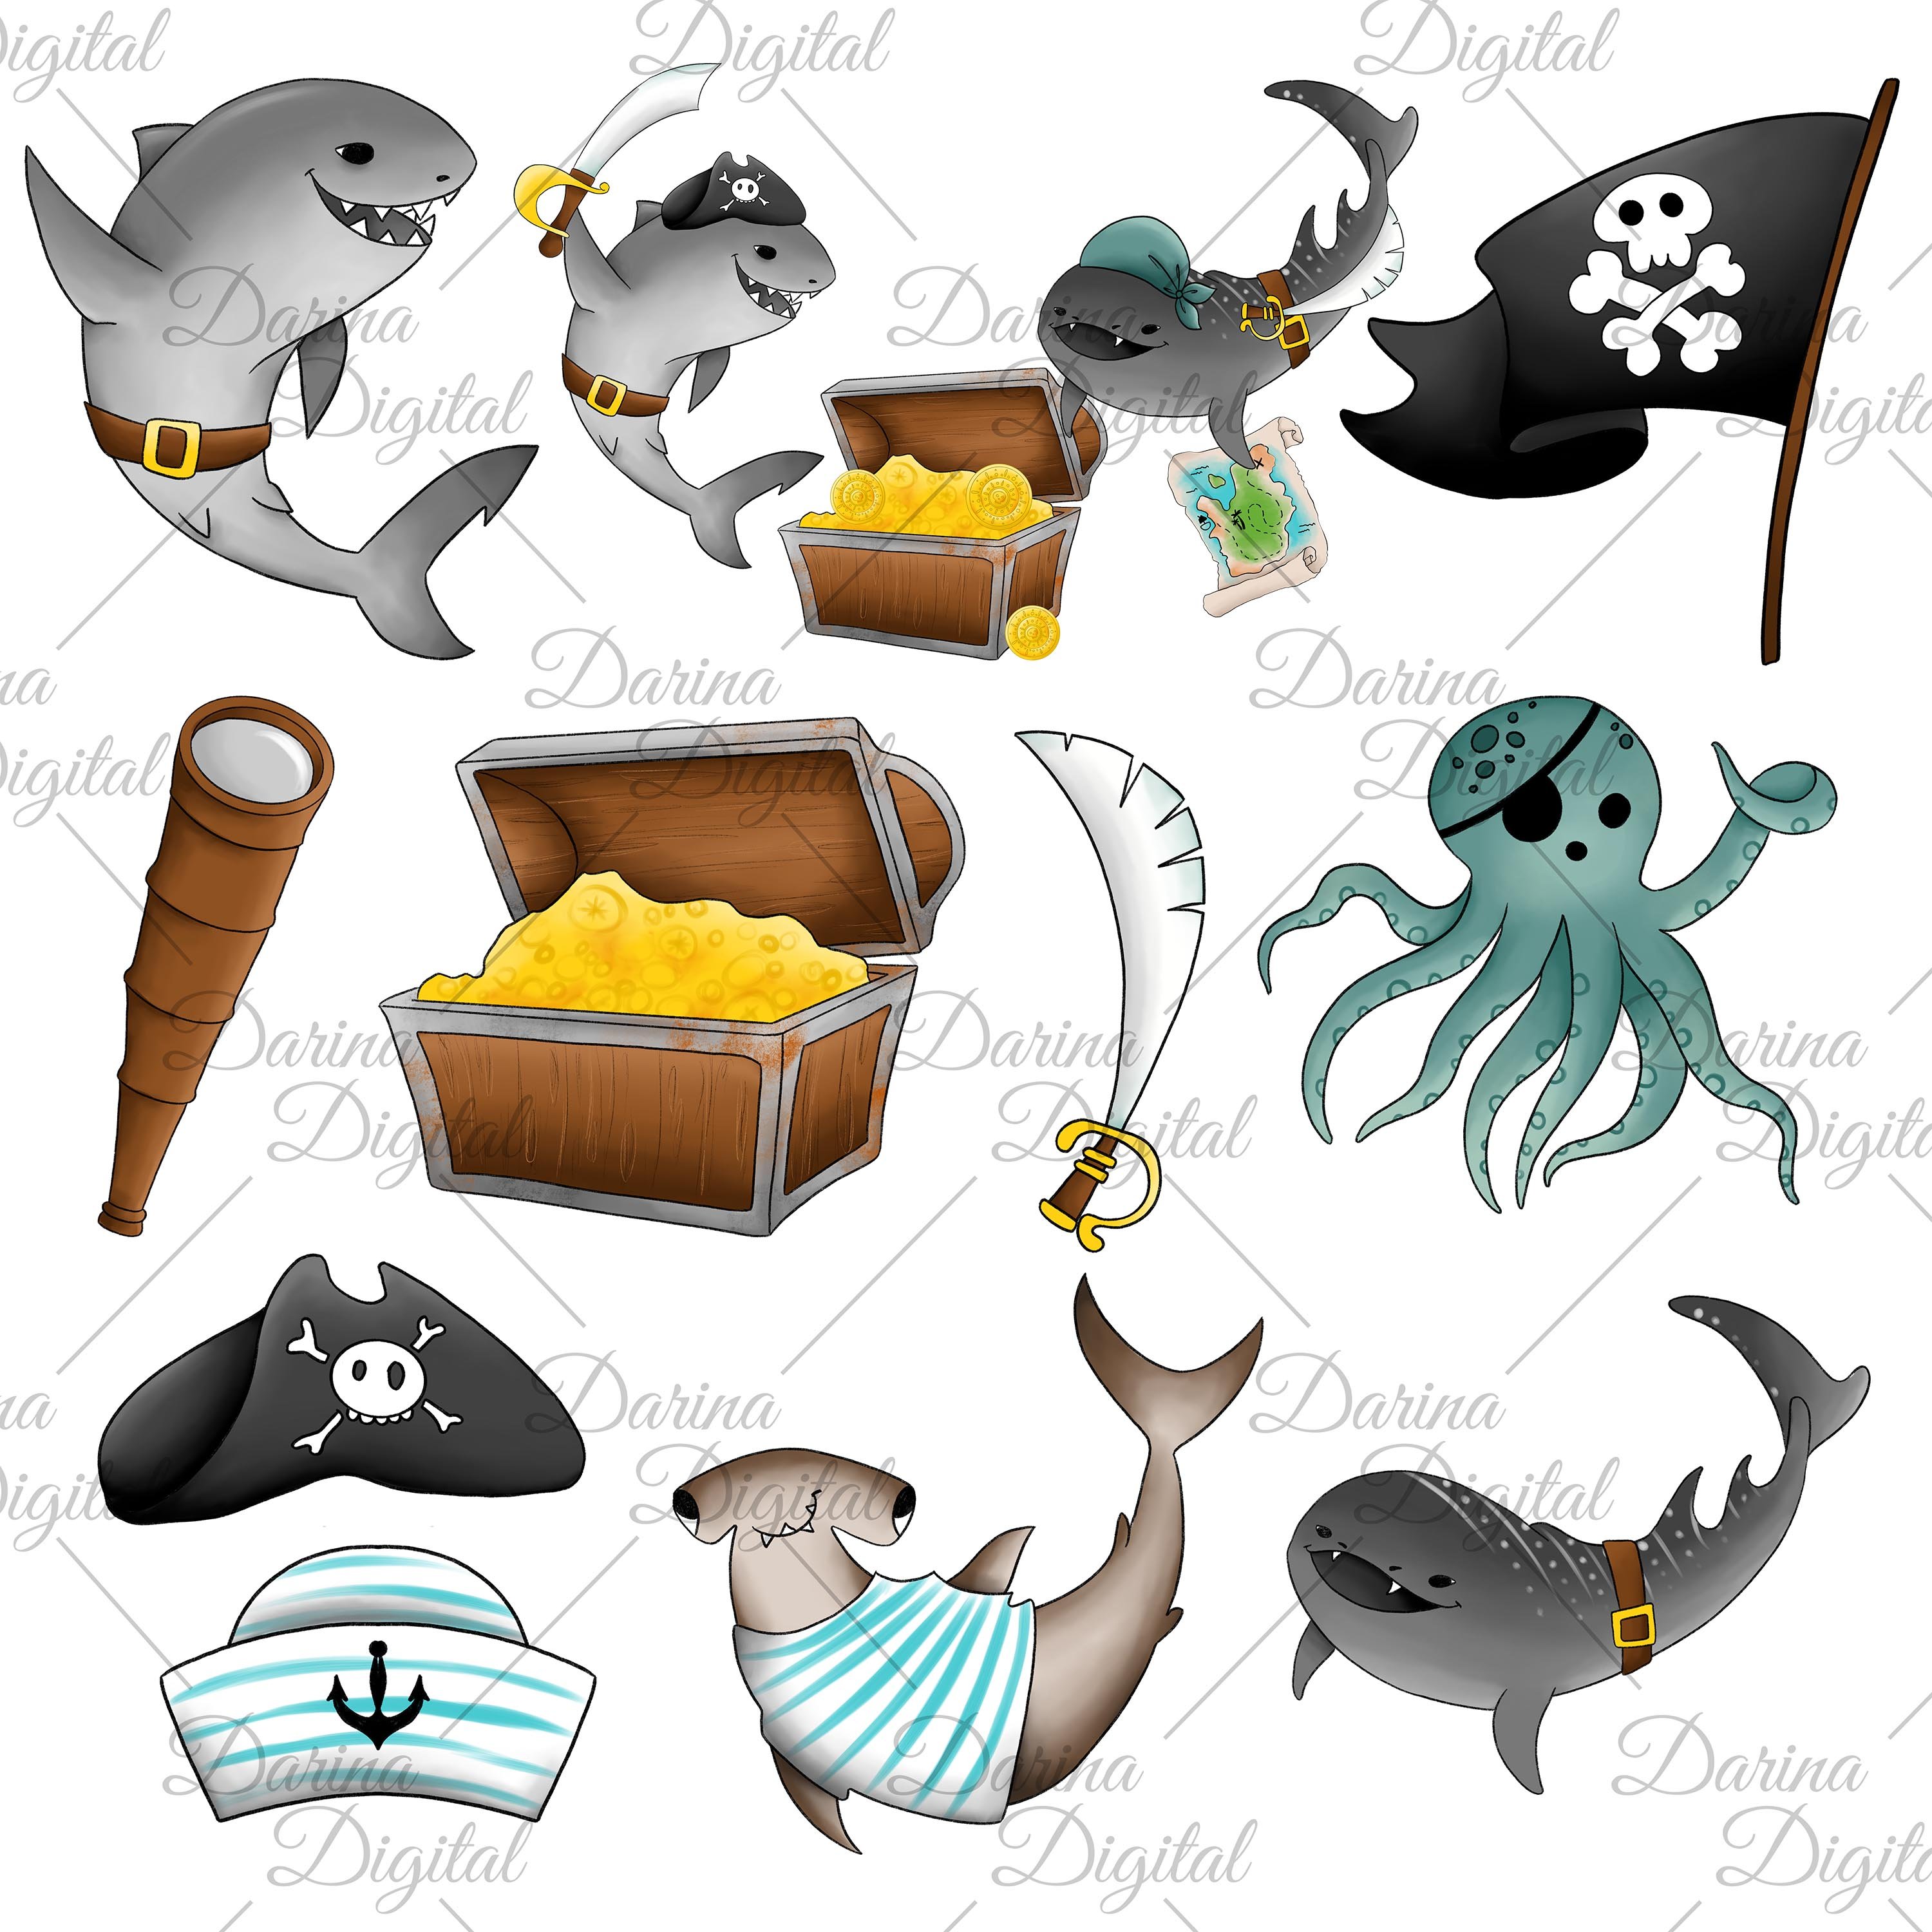 Diverse of items for shark pirate illustration.